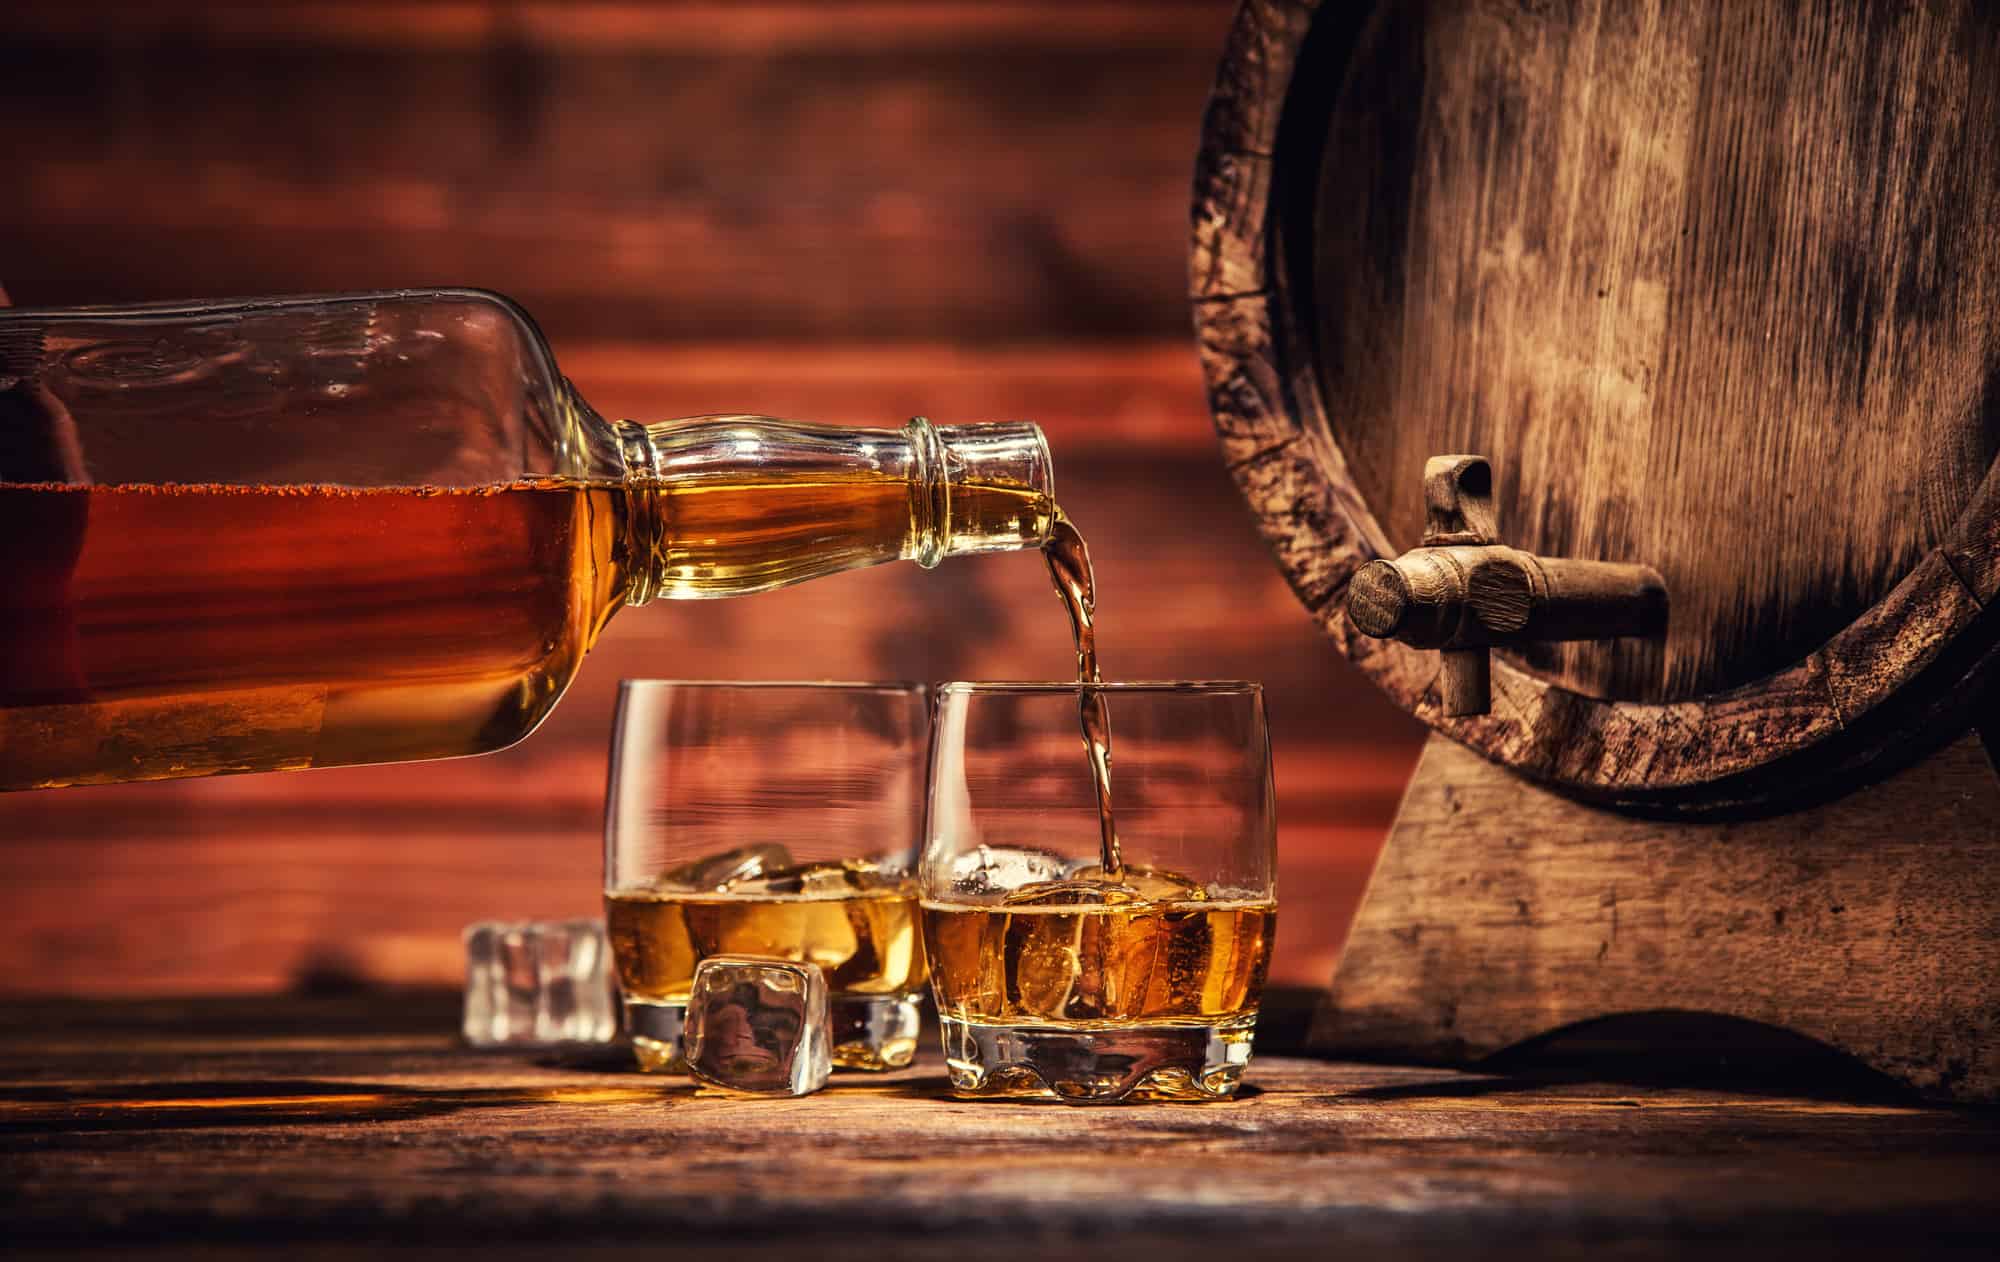 Global Scottish Whisky Market Is Estimated To Witness High Growth Owing To Increasing Demand for Premium Spirits & Cultural Significance